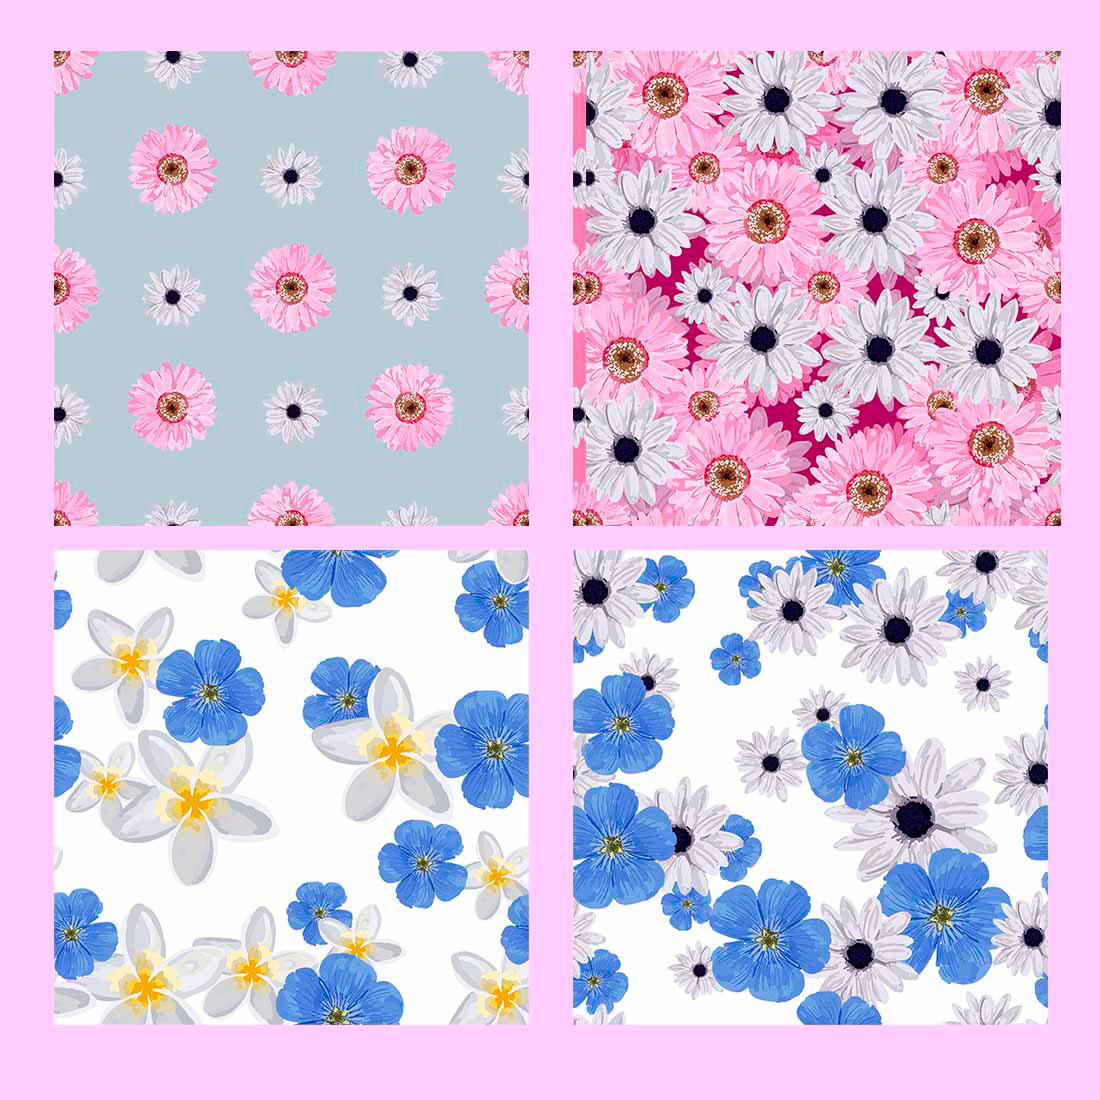 Collection of images of enchanting patterns with flowers.